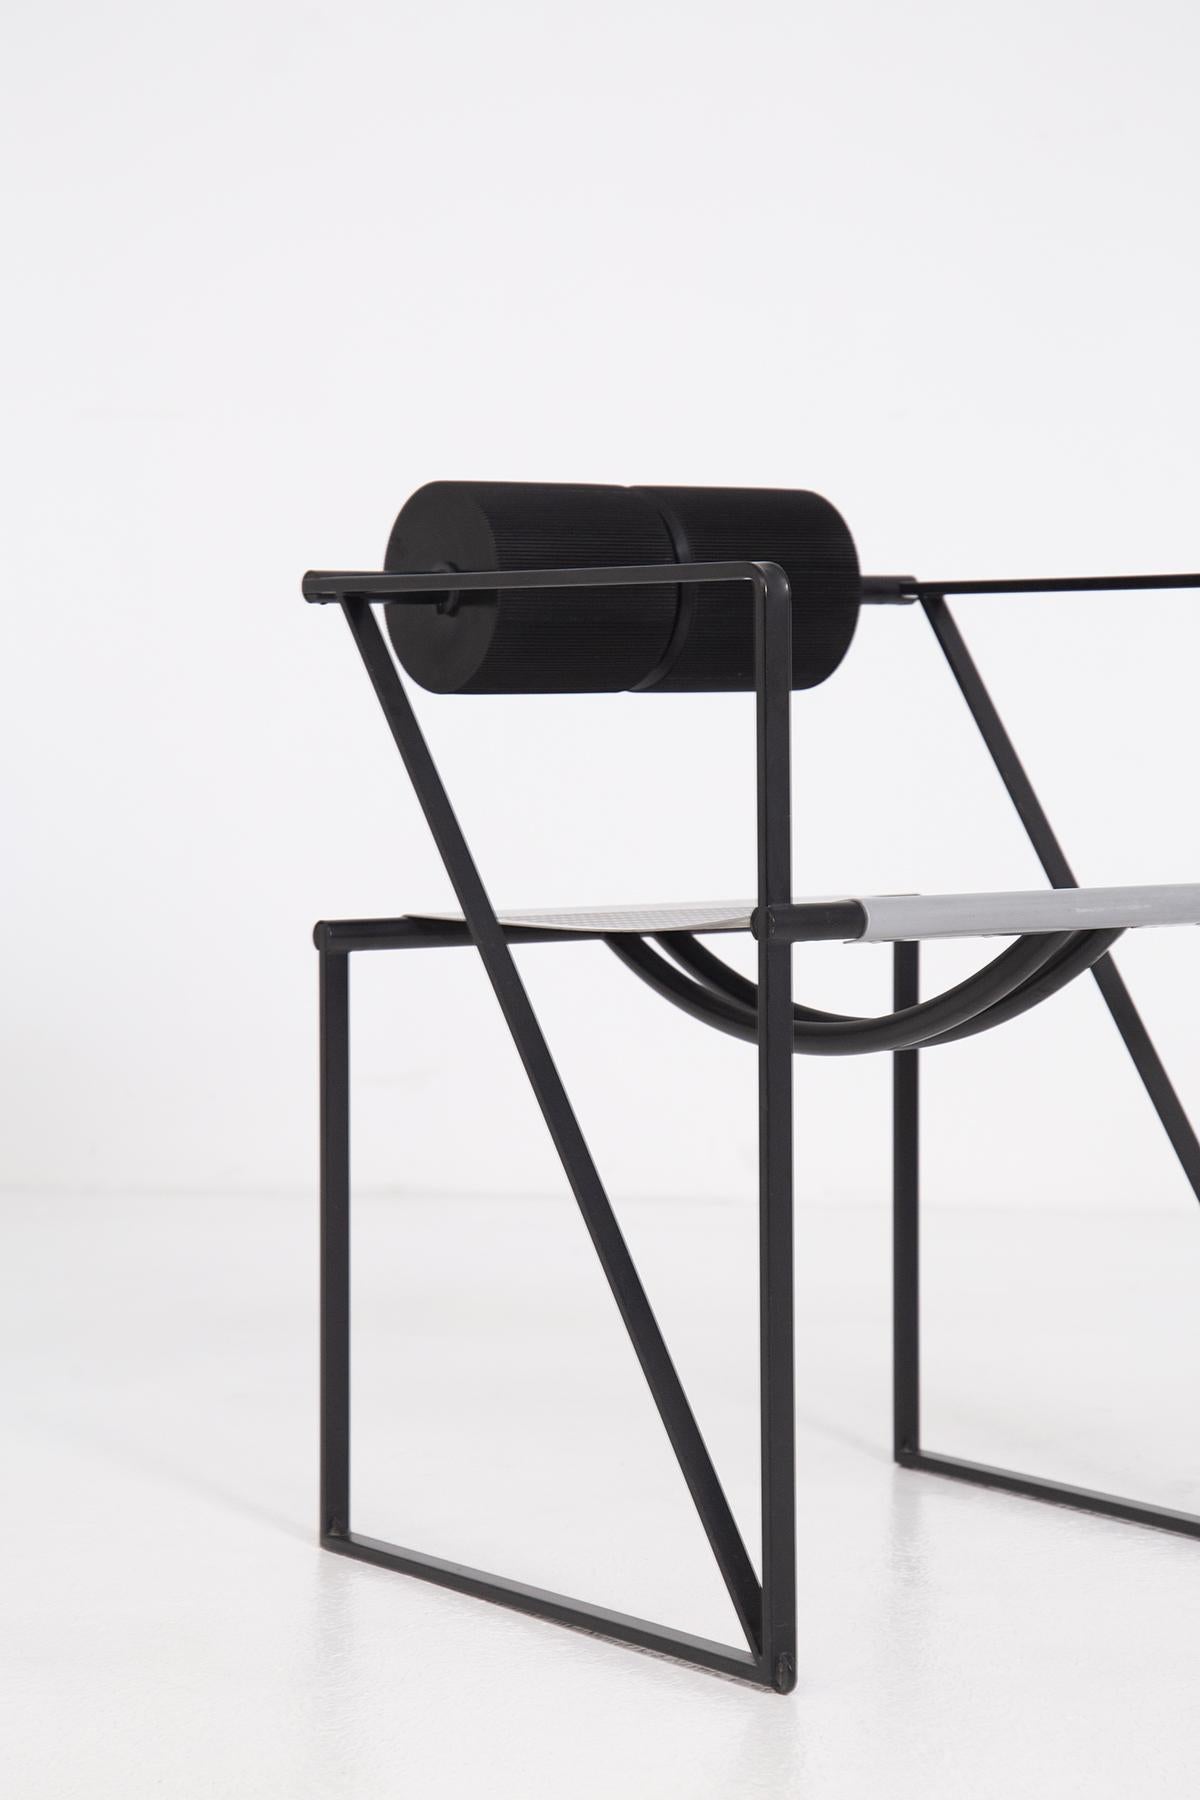 Steel Pair of Chairs Seconda 602 by Mario Botta for Alias 1982s by Botta Collection